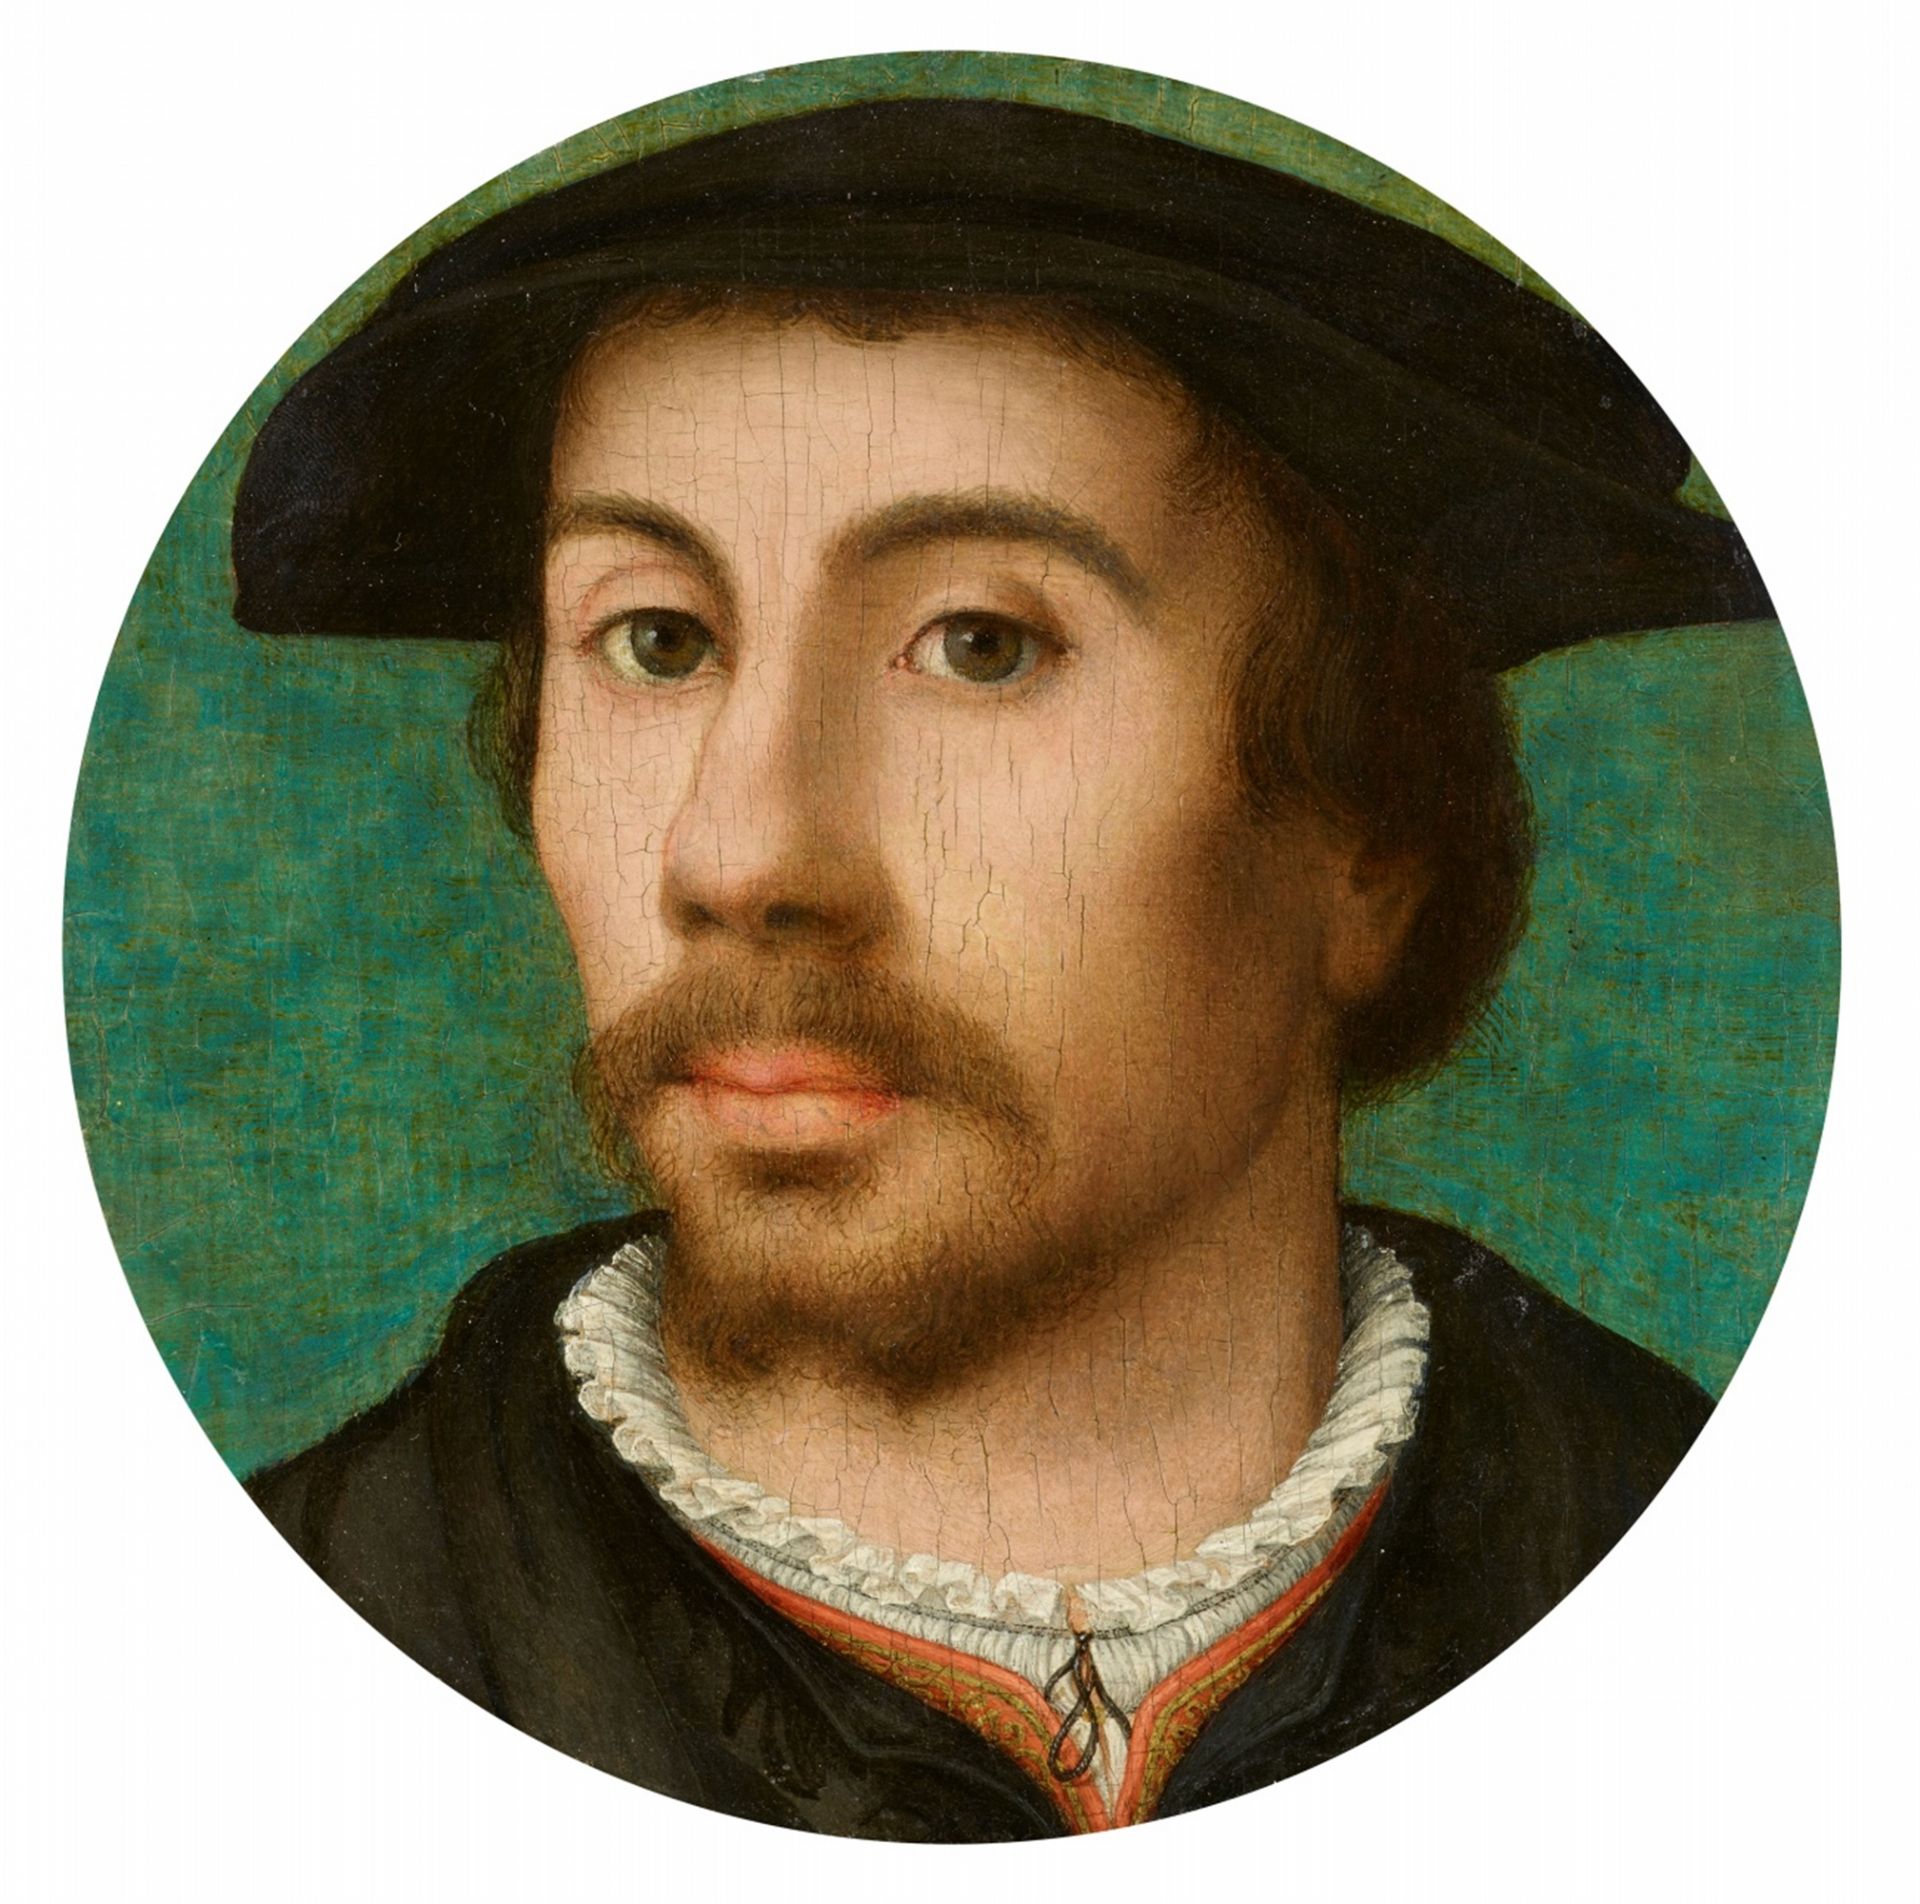 French school 16th century, Portrait of a Man in a Black Beret